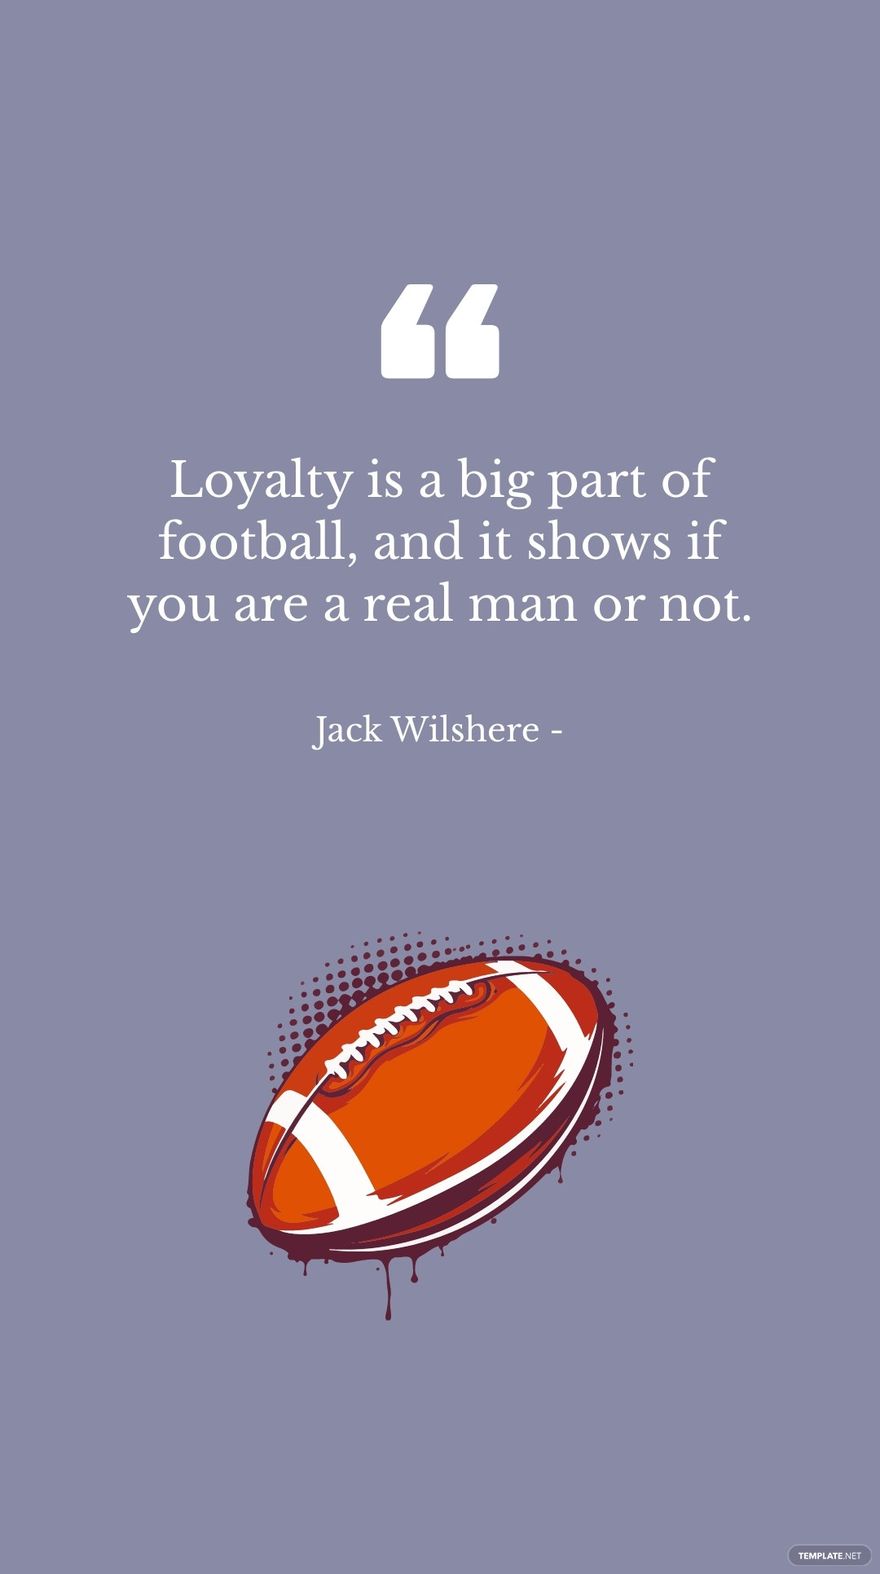 Free Jack Wilshere - Loyalty is a big part of football, and it shows if you are a real man or not. in JPG